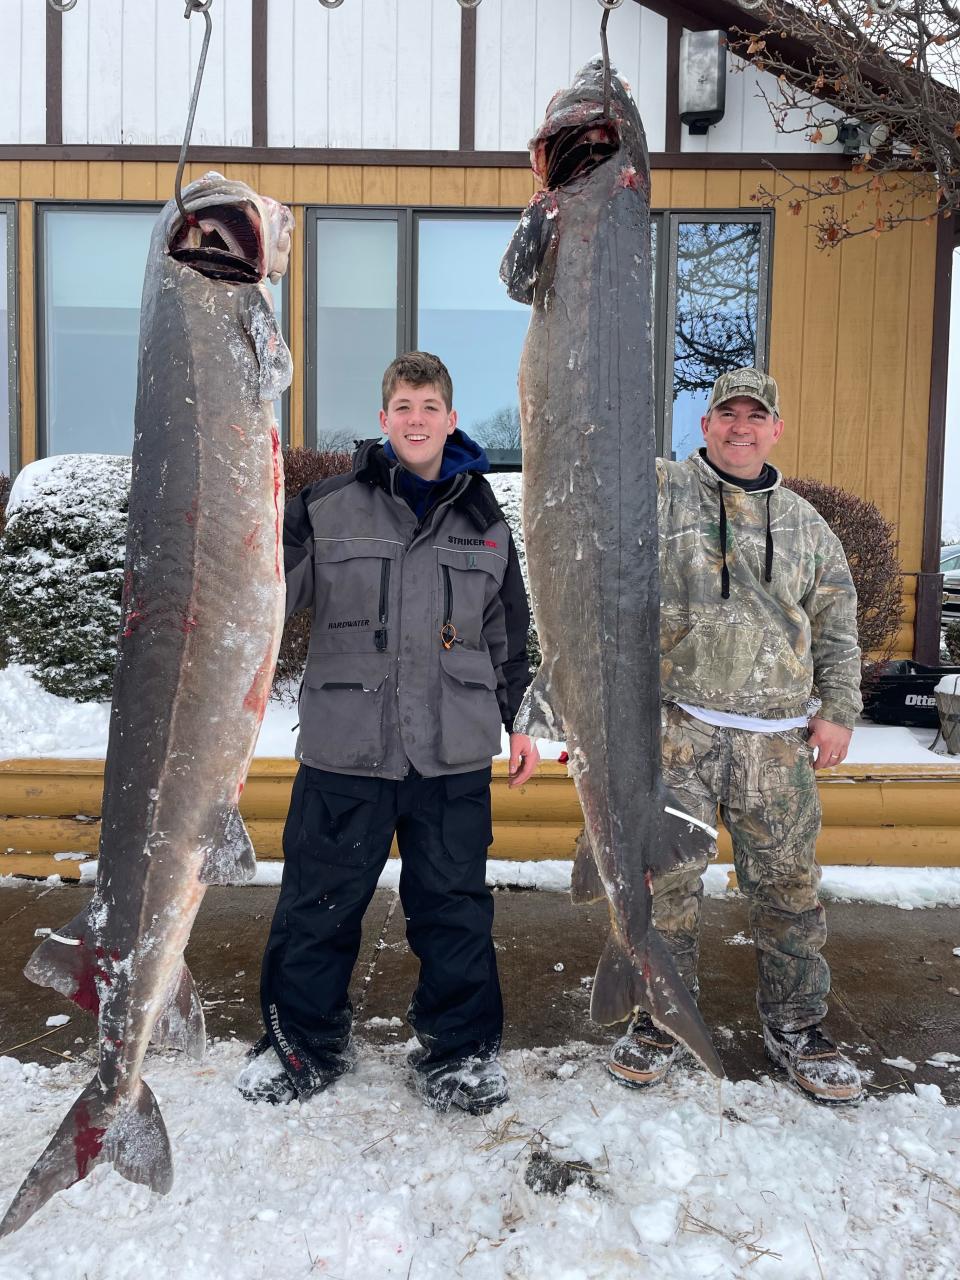 Eli (left) and his father Paul Muche, both of Van Dyne, pose with lake sturgeon they speared hours apart Feb. 23 in the same shack on Lake Winnebago. Eli's fish weighed 111 pounds and Paul's weighed 91.